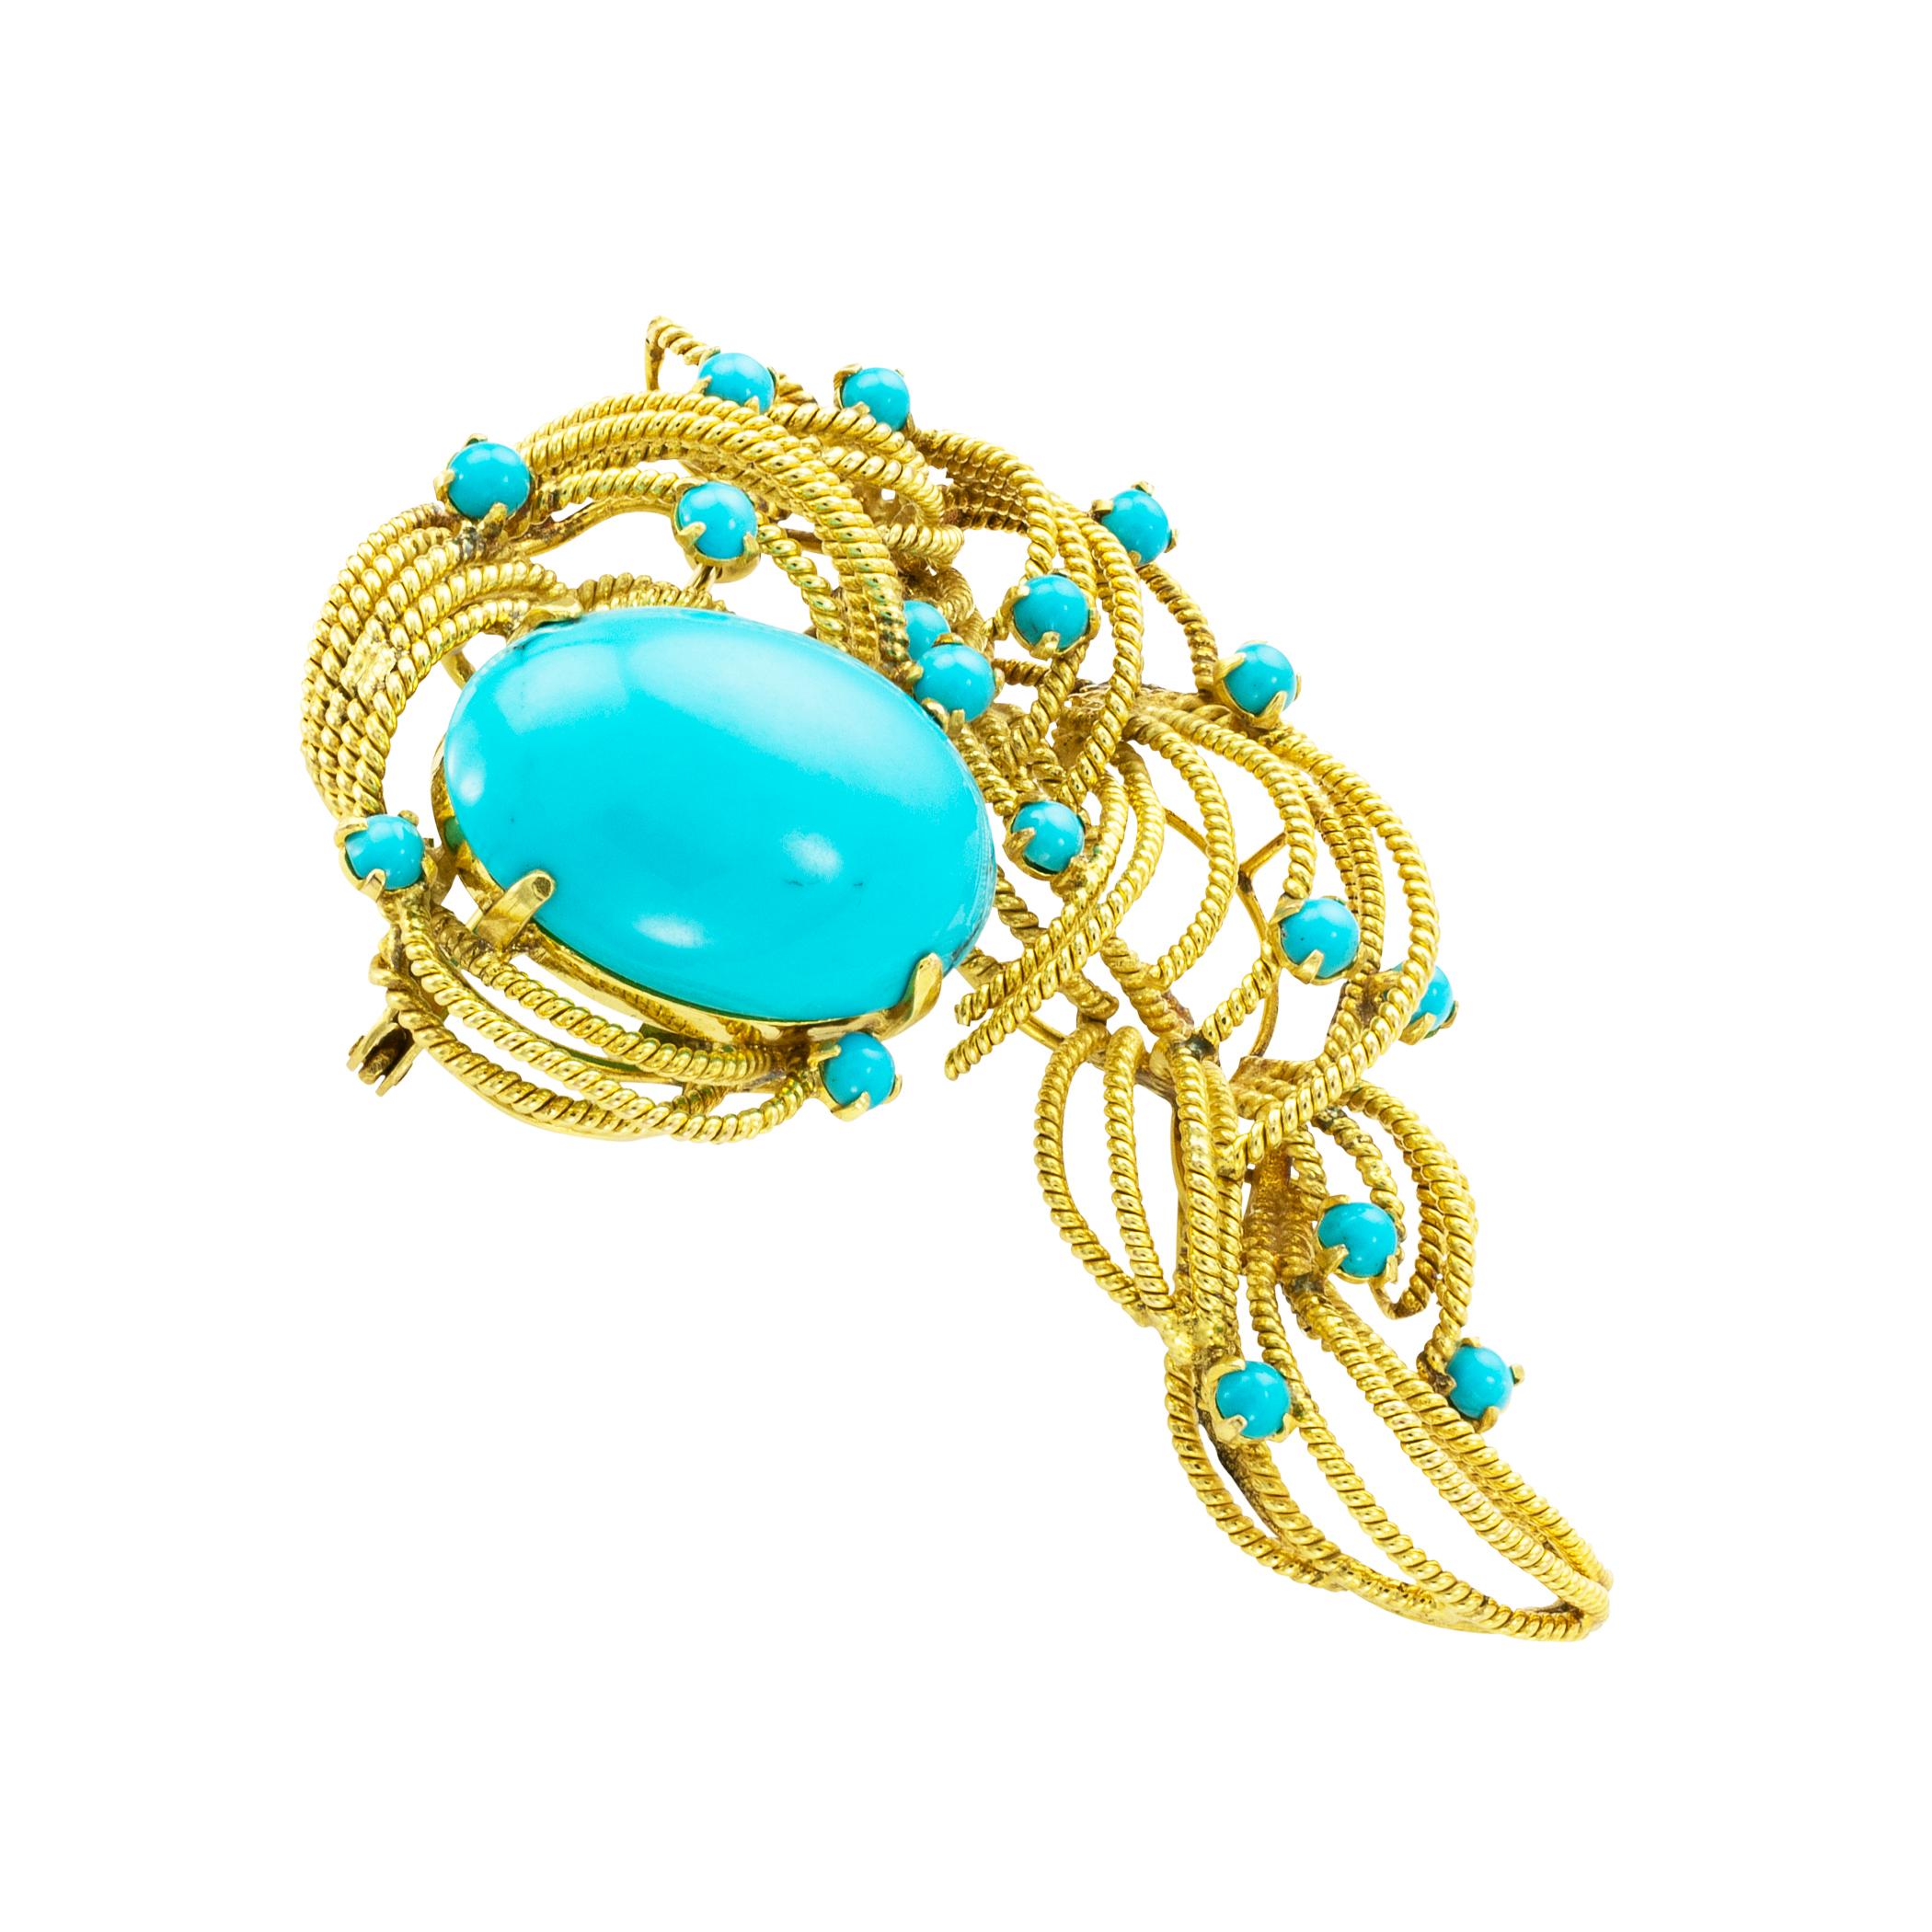 Turquoise and yellow gold handcrafted brooch pendant circa 1970. *

ABOUT THIS ITEM:  #P-DJ130A. Scroll down for detailed specifications. Here we have a stunning vintage brooch that combines turquoise and gold in a truly creative and ingenious way.